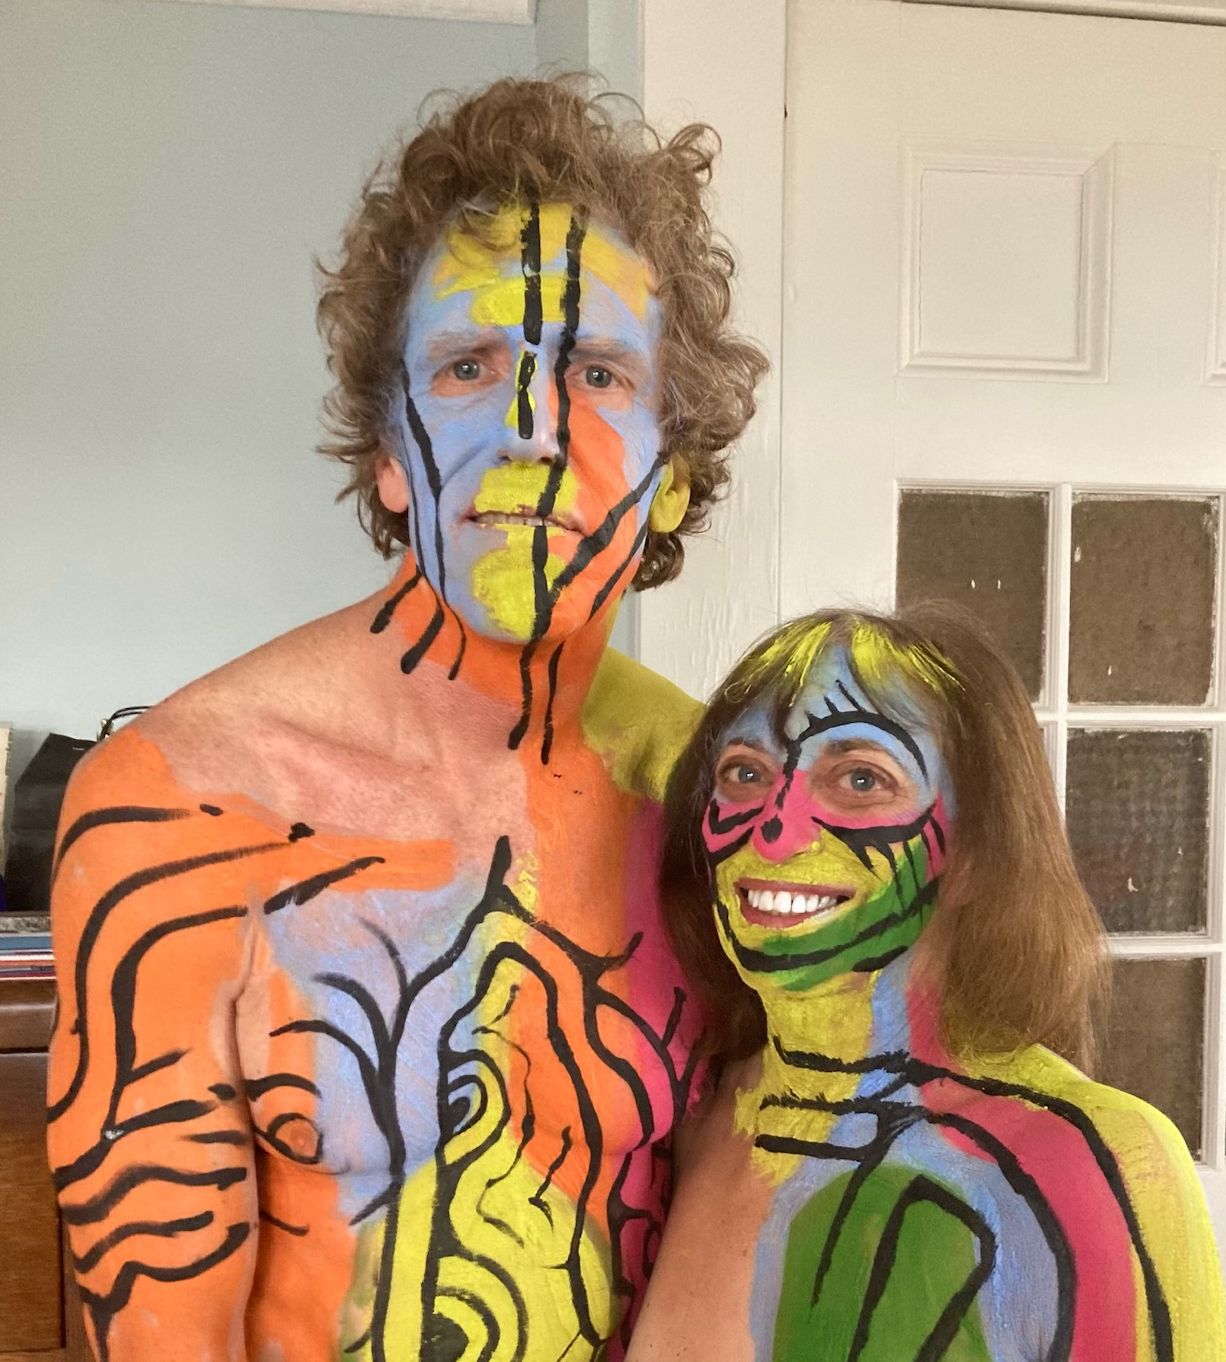 I Stripped Down For Nude Body Painting At Age 75 — And So Did My Husband pic